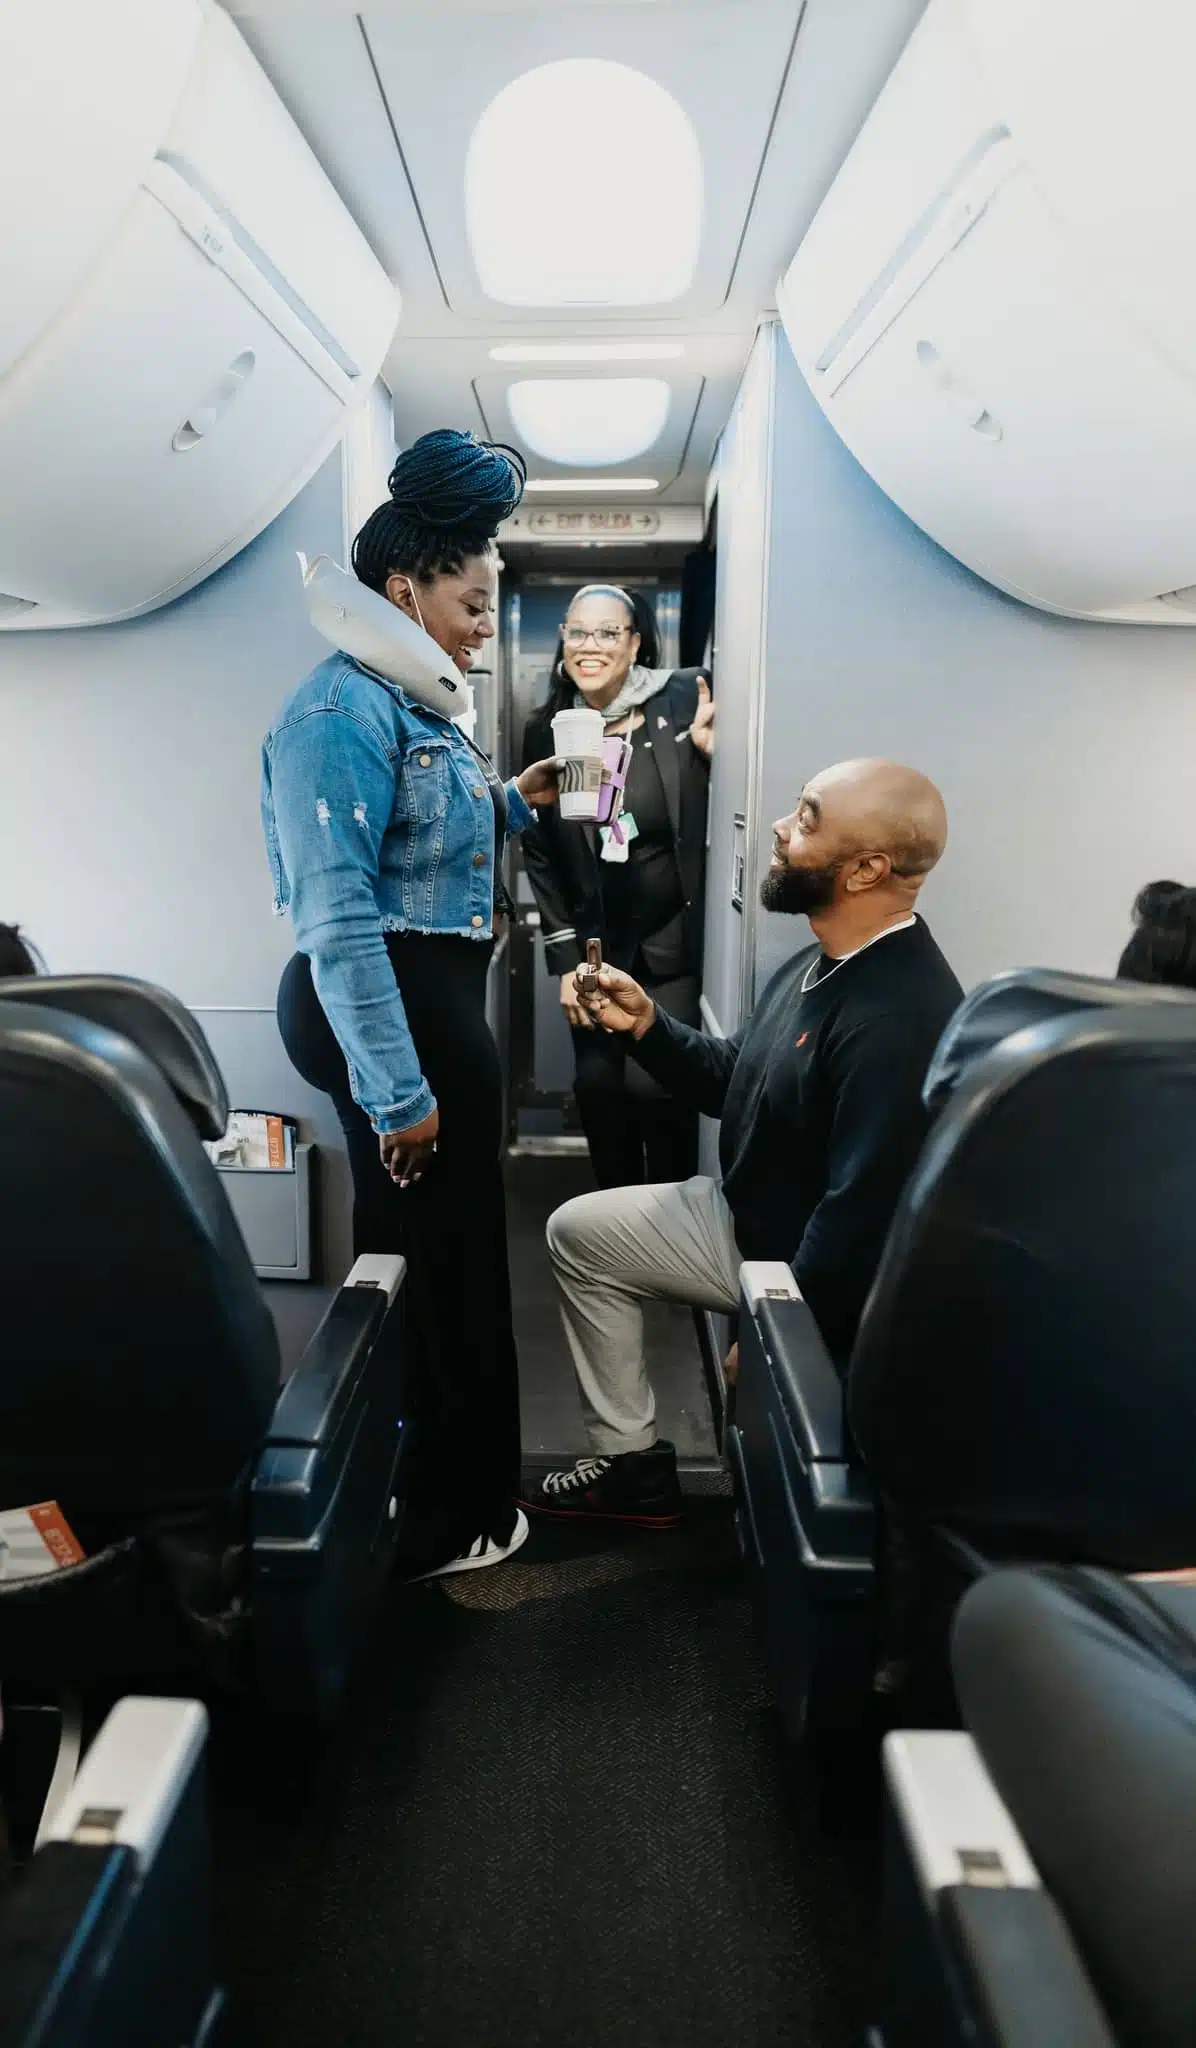 Man gets special help from a US-based airline to propose to girlfriend.